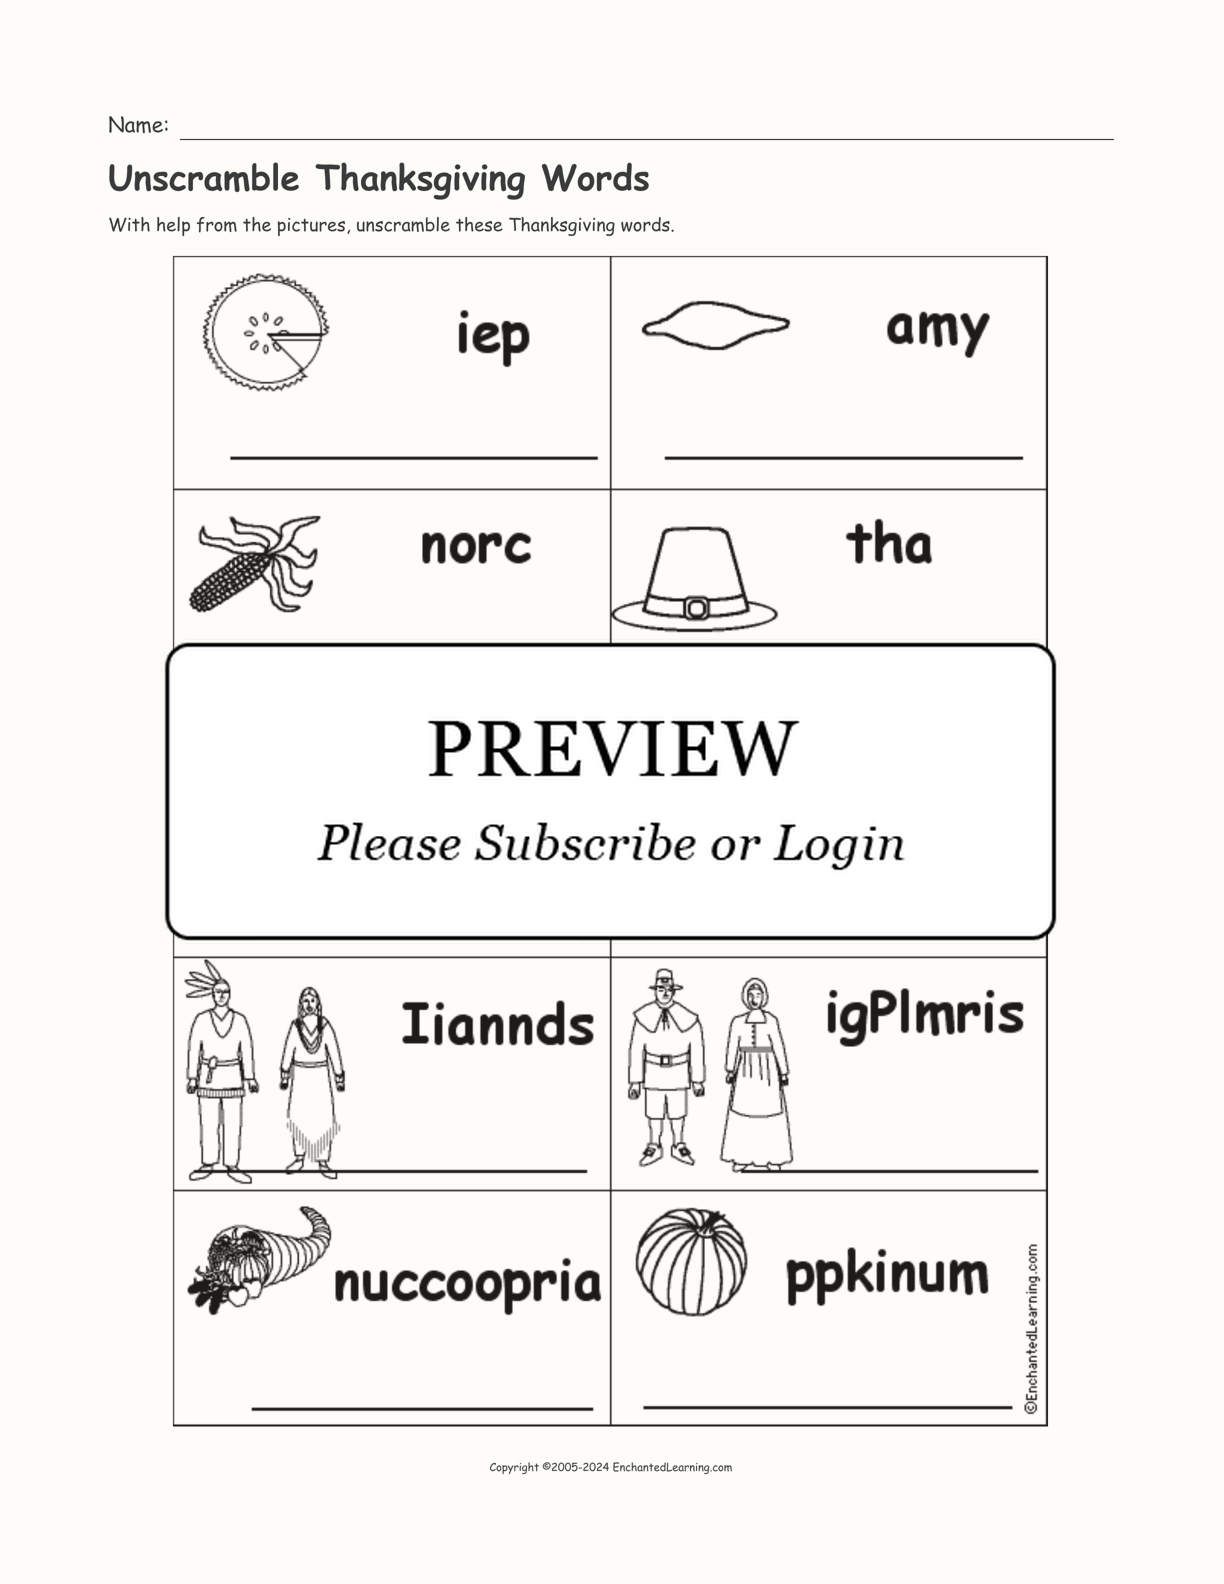 Unscramble Thanksgiving Words interactive worksheet page 1